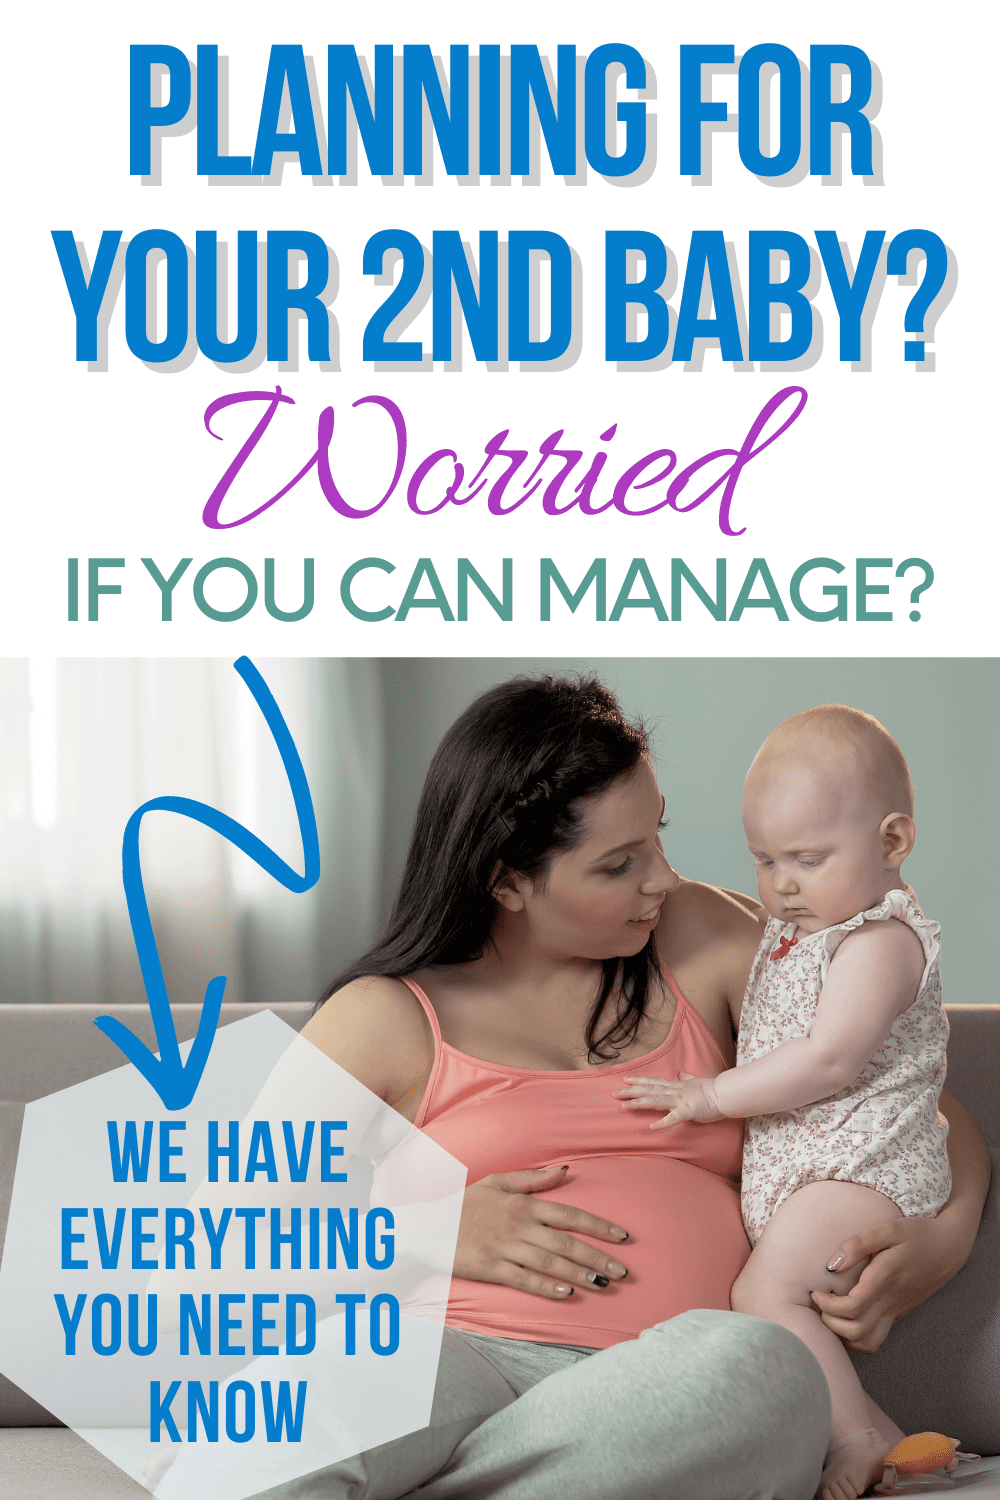 Planning for your 2nd baby